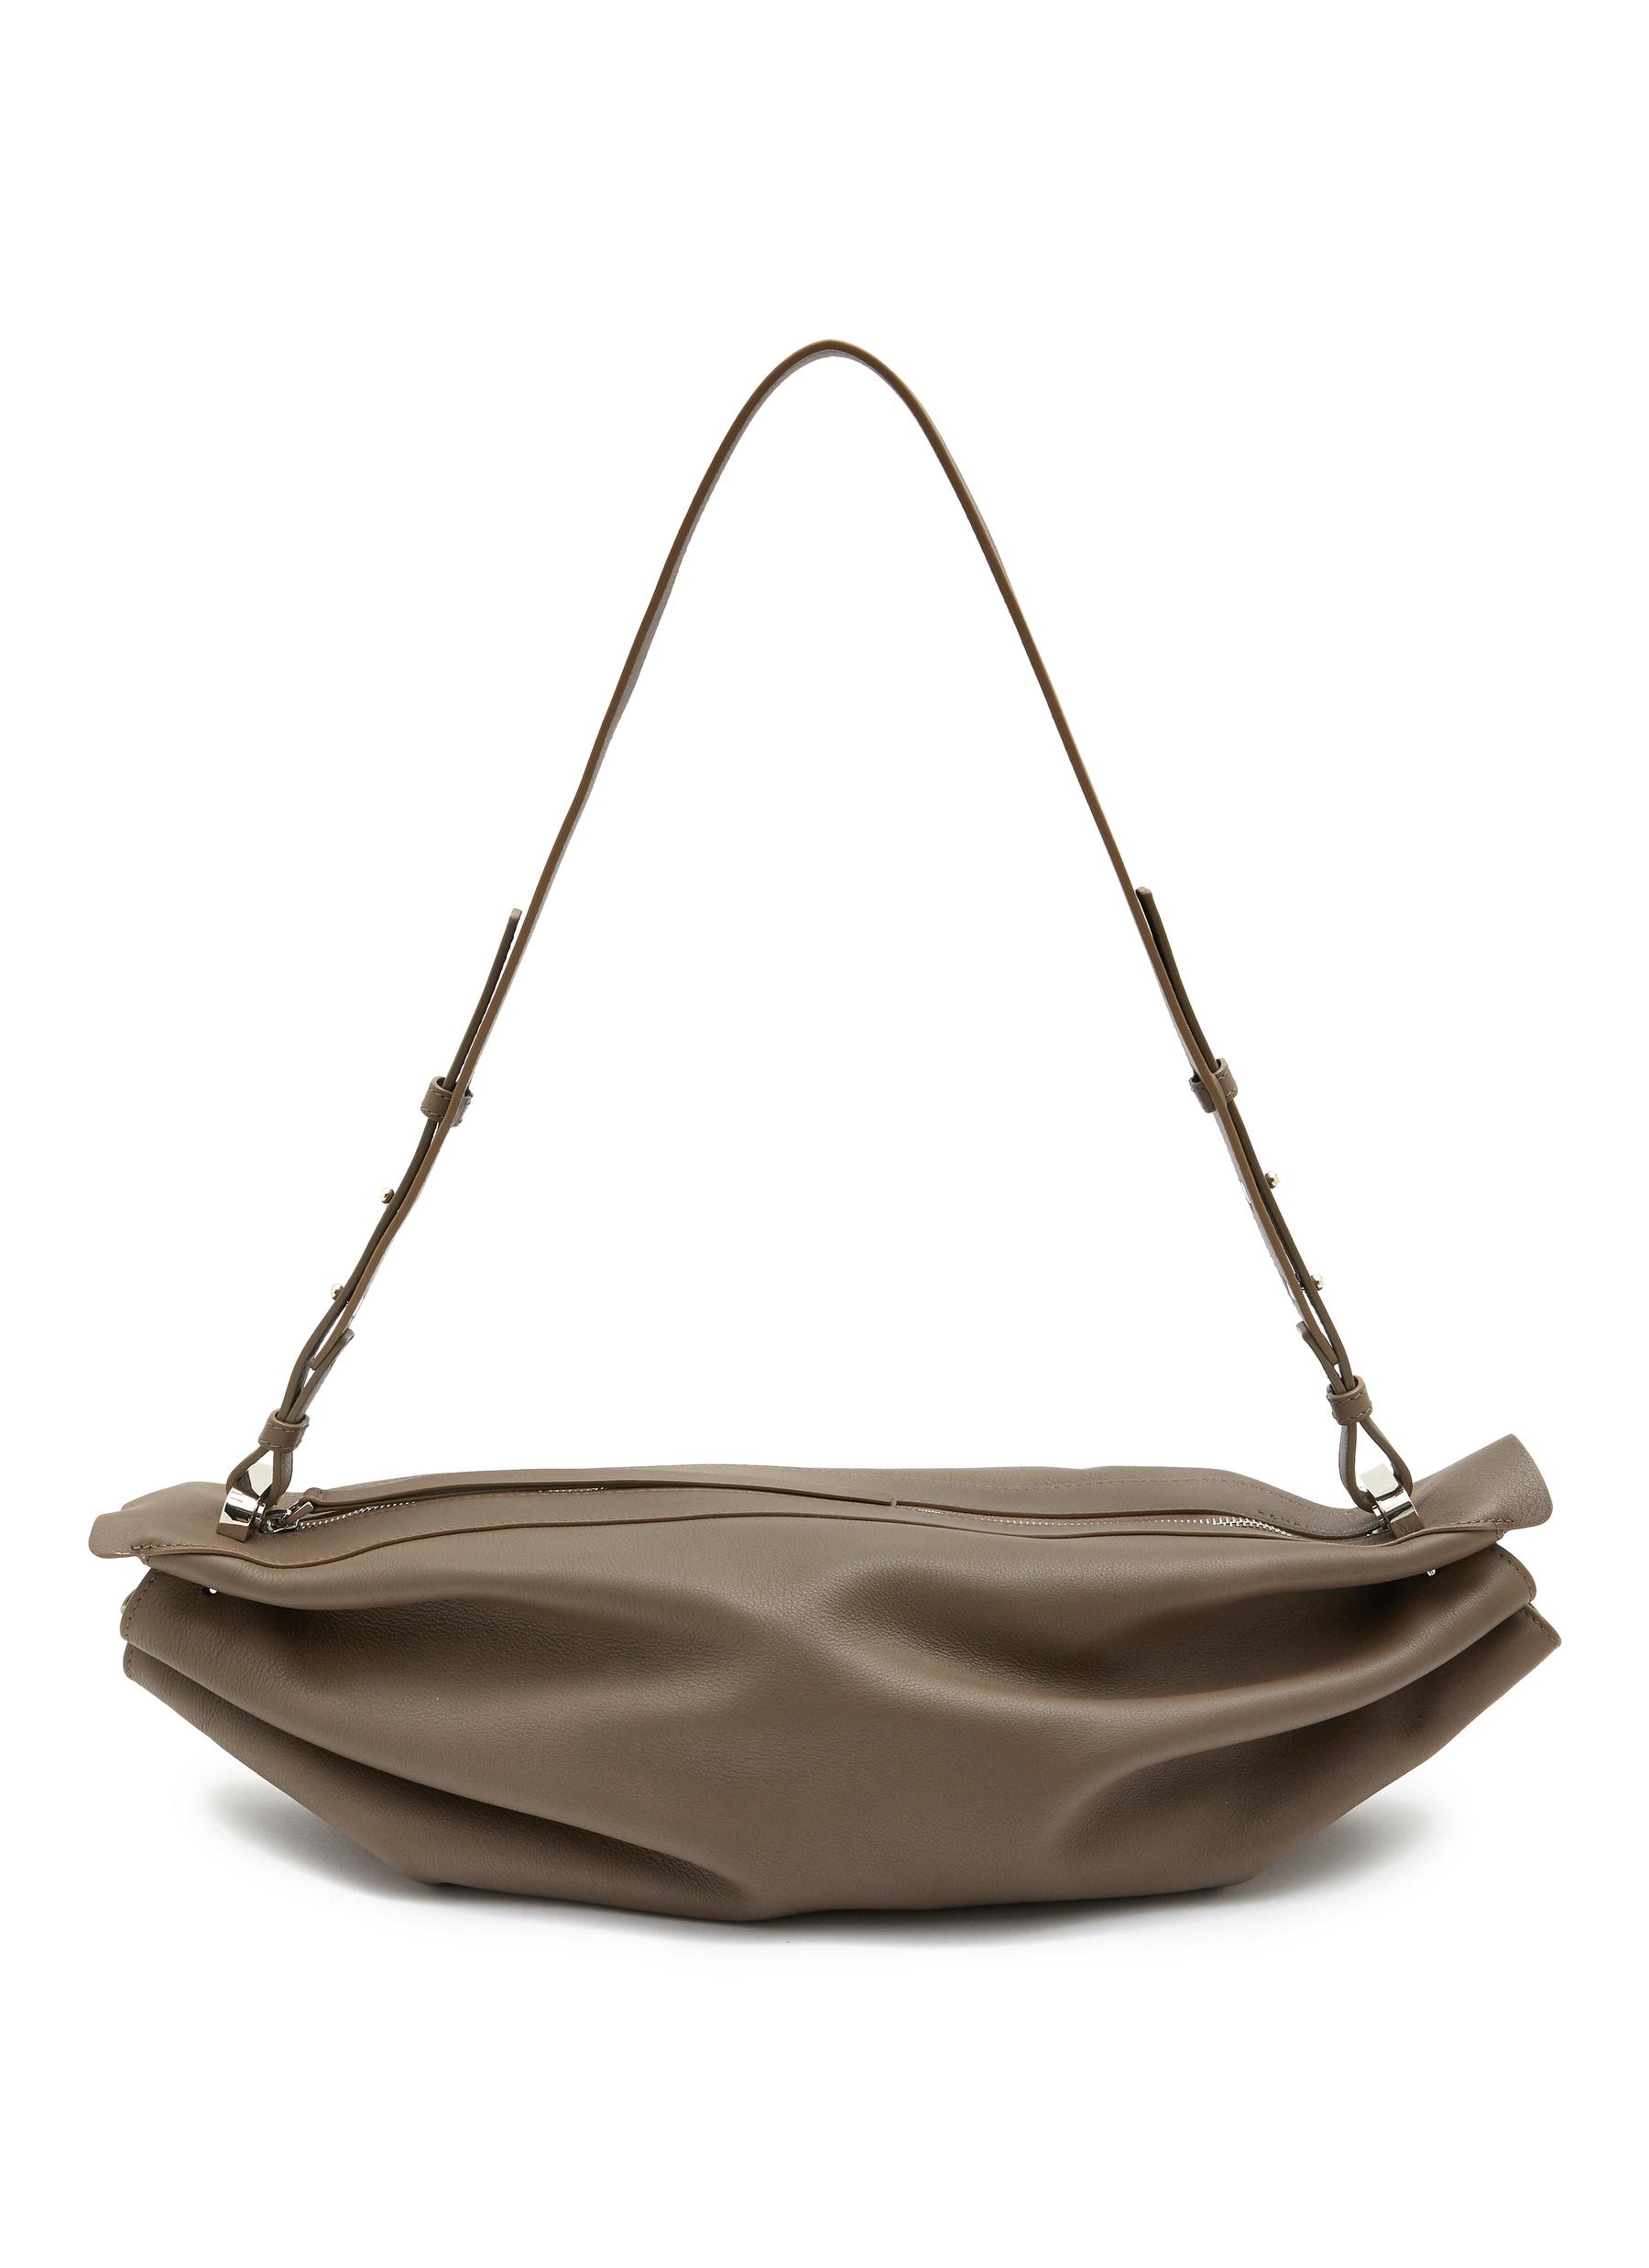 Large Slouchy Banana Bag in Leather